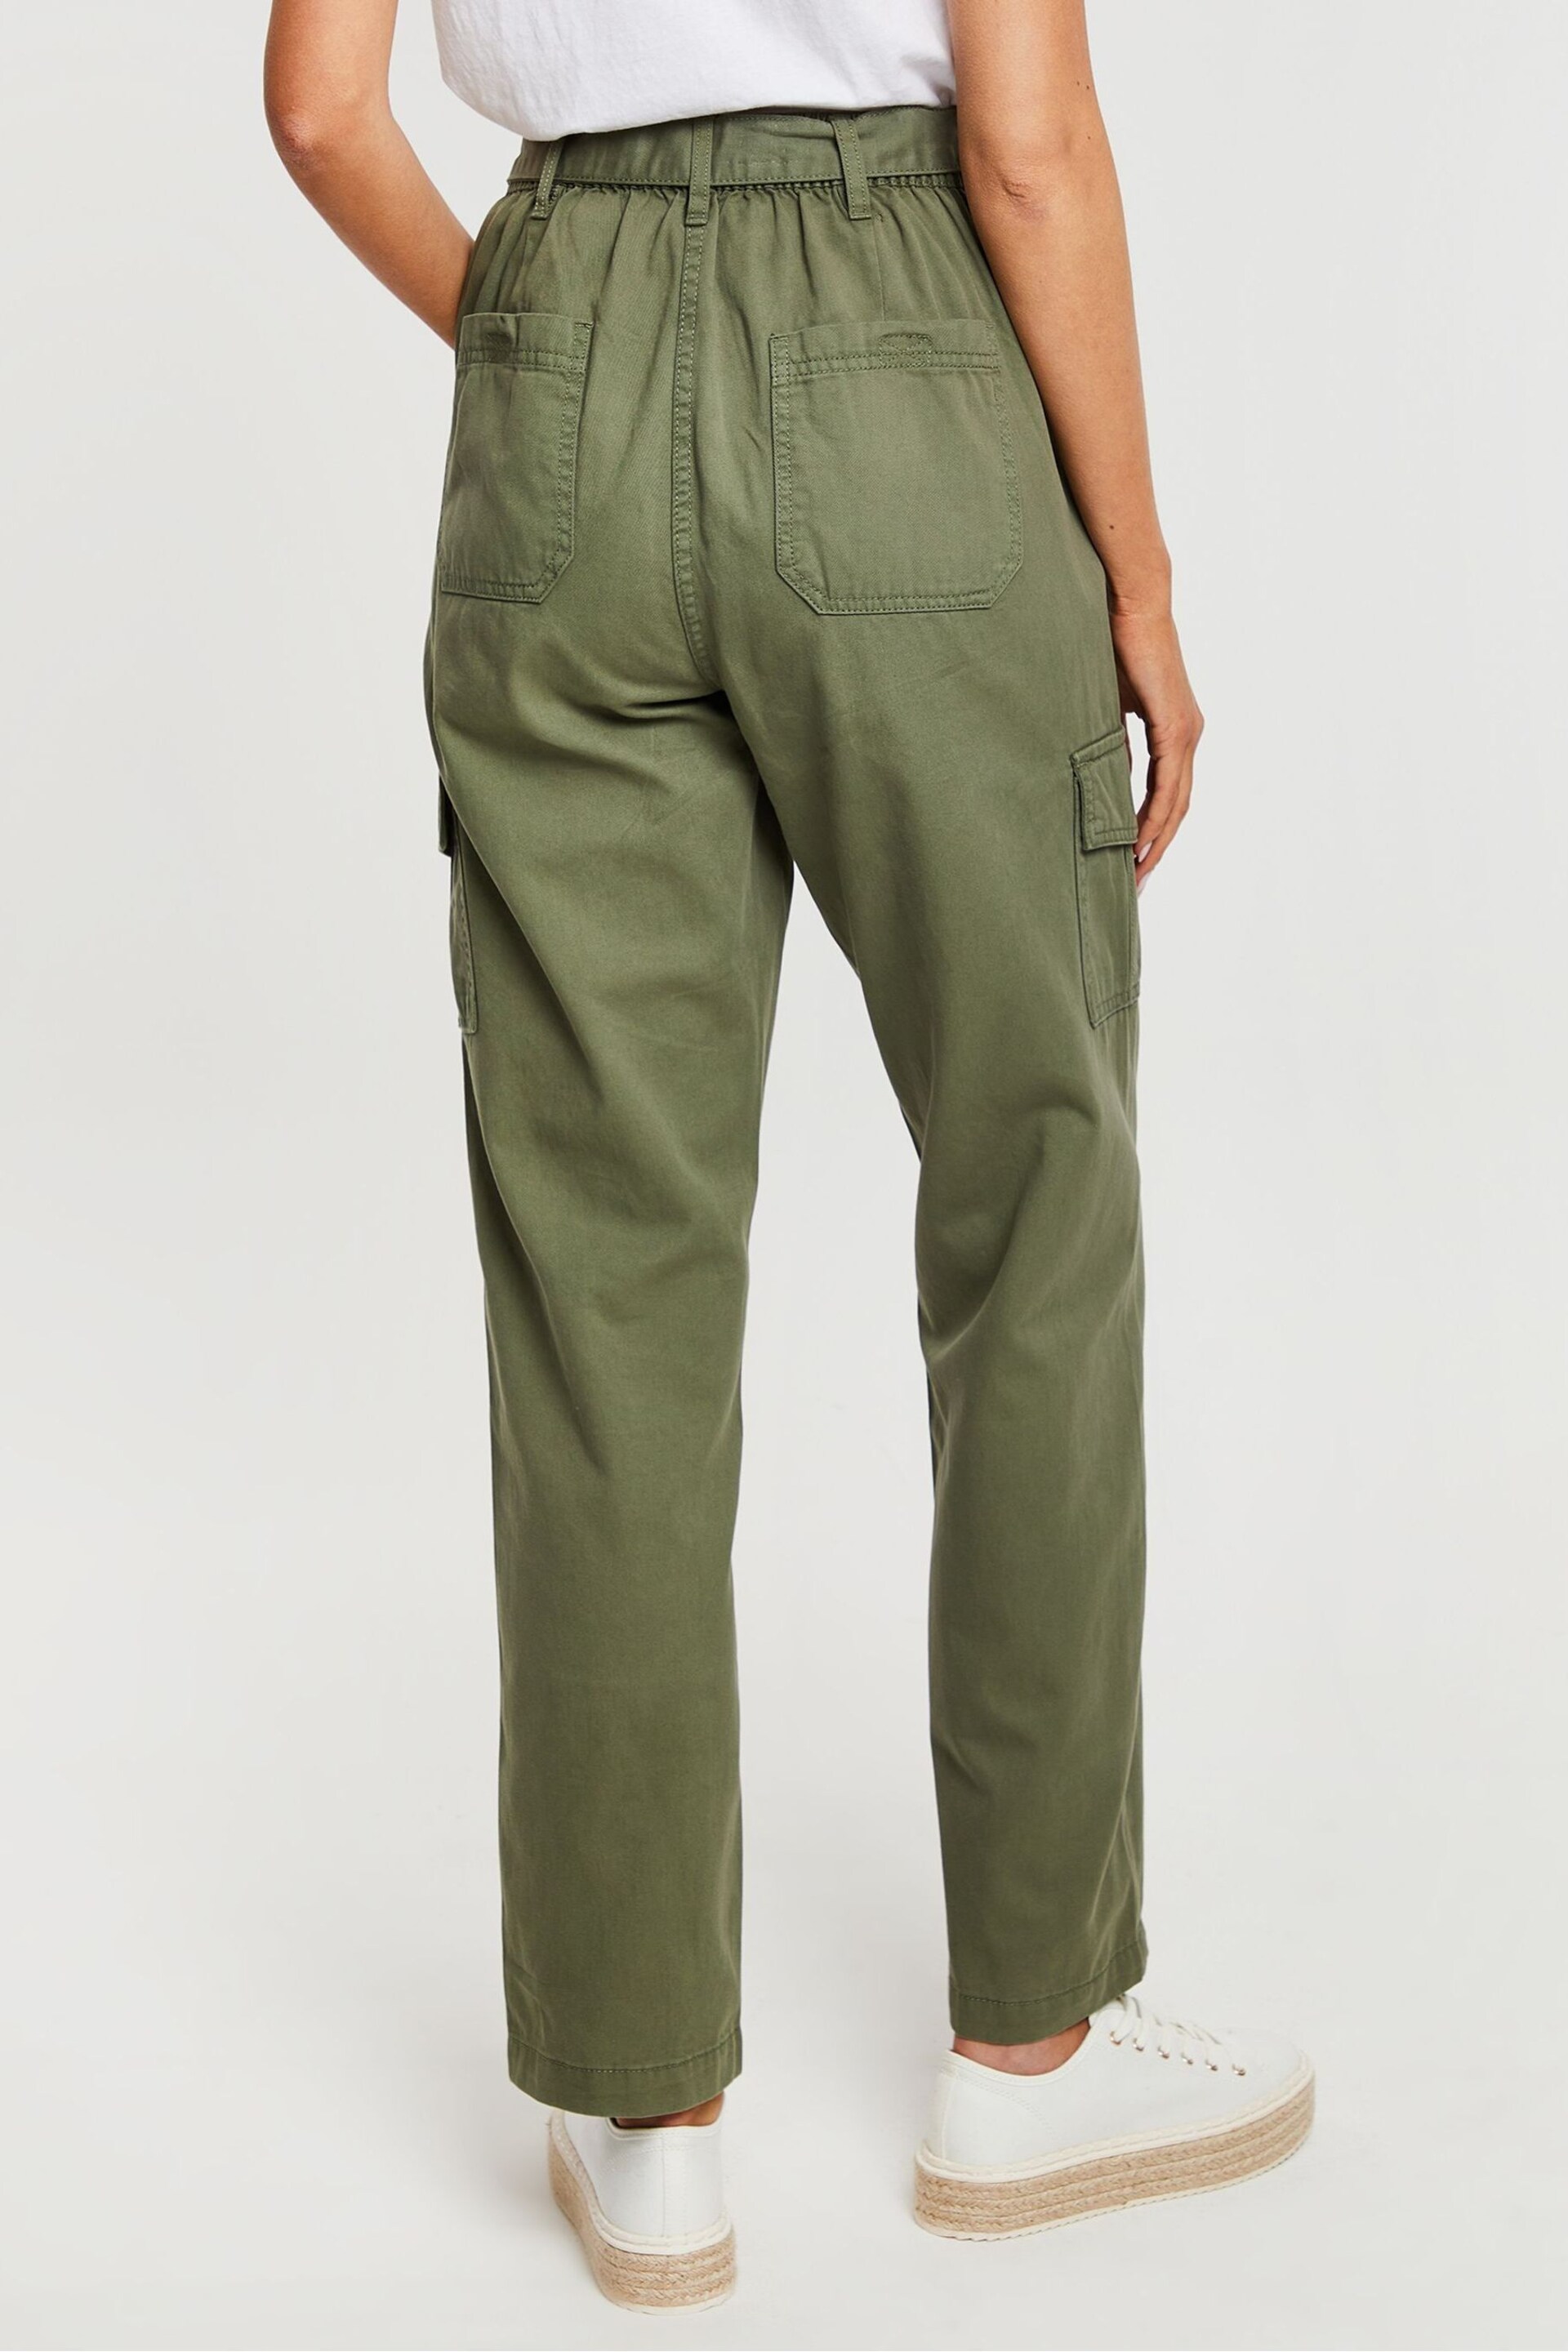 Threadbare Green Cargo Utility Straight Leg Belted Trousers - Image 2 of 4